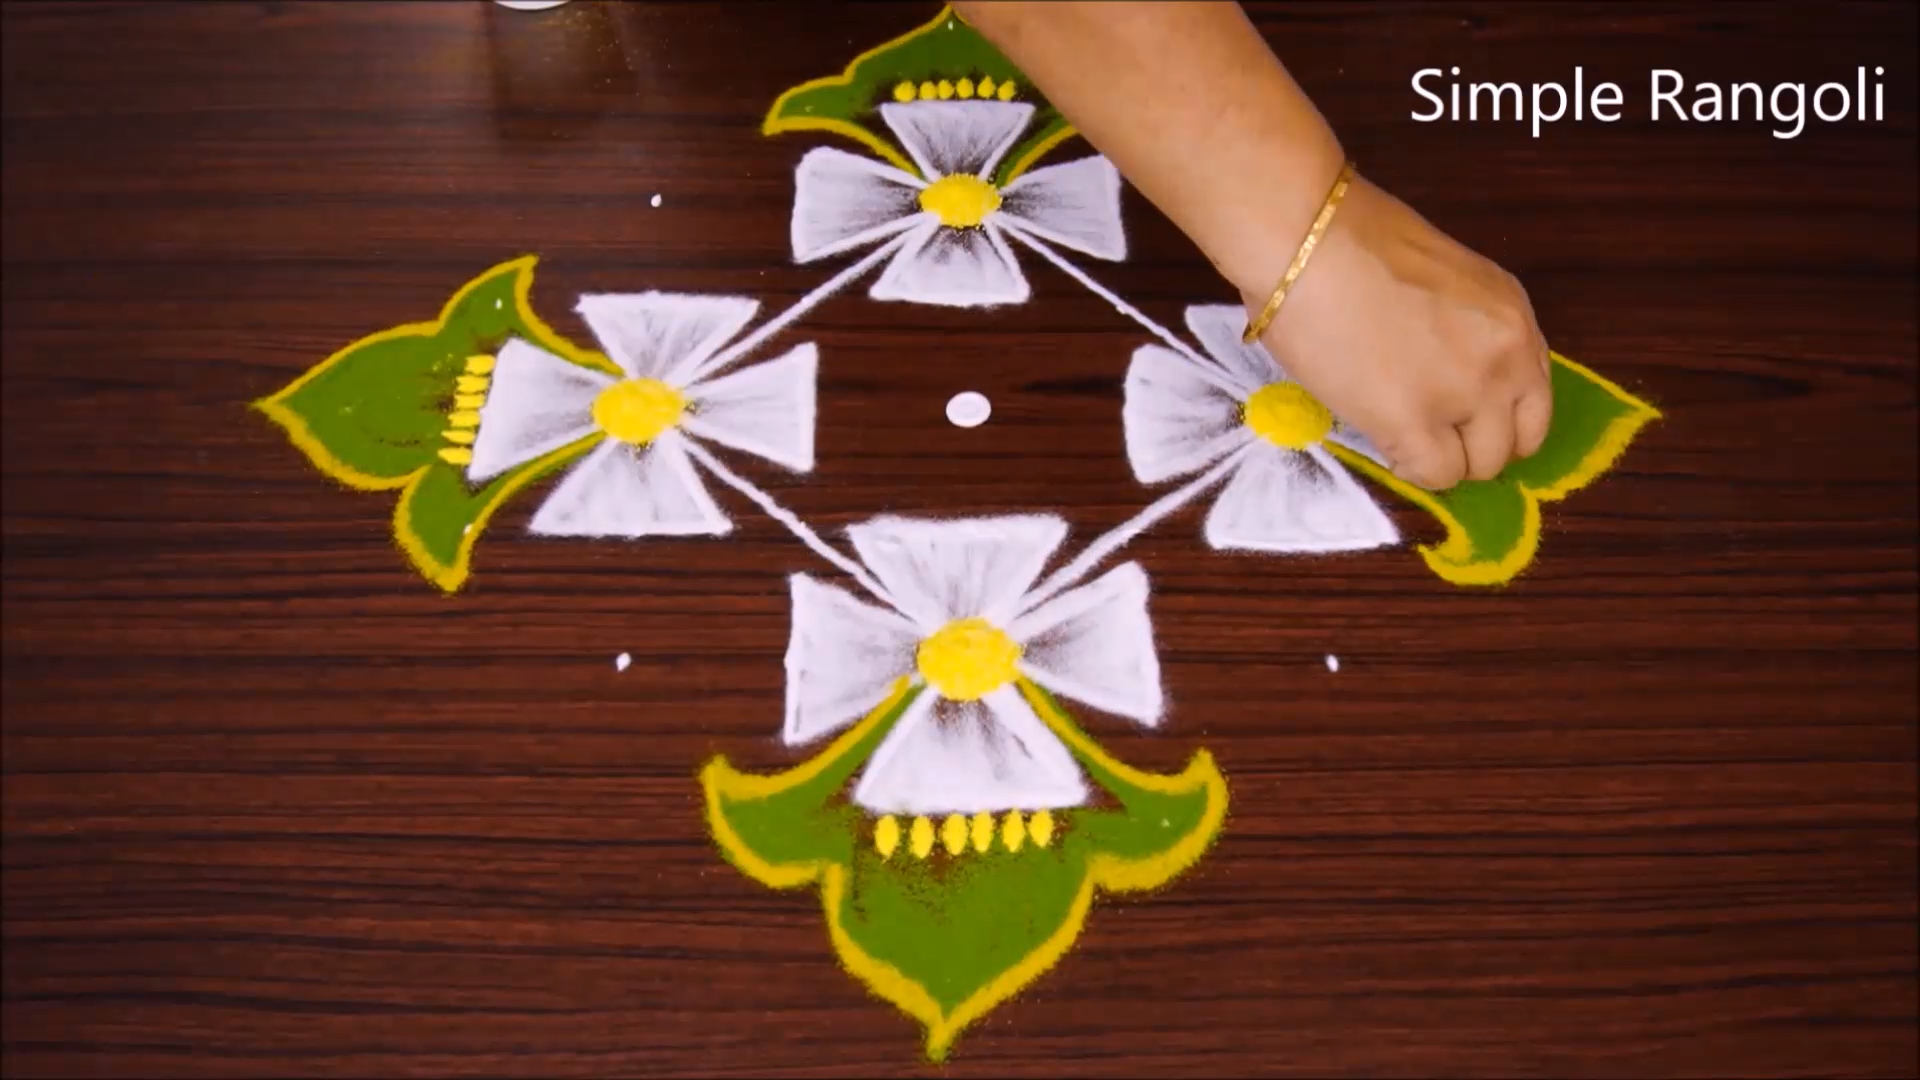 Simple Rangoli Designs With Dots - Simple Rangoli Designs With Dots -   18 beauty Design flower ideas